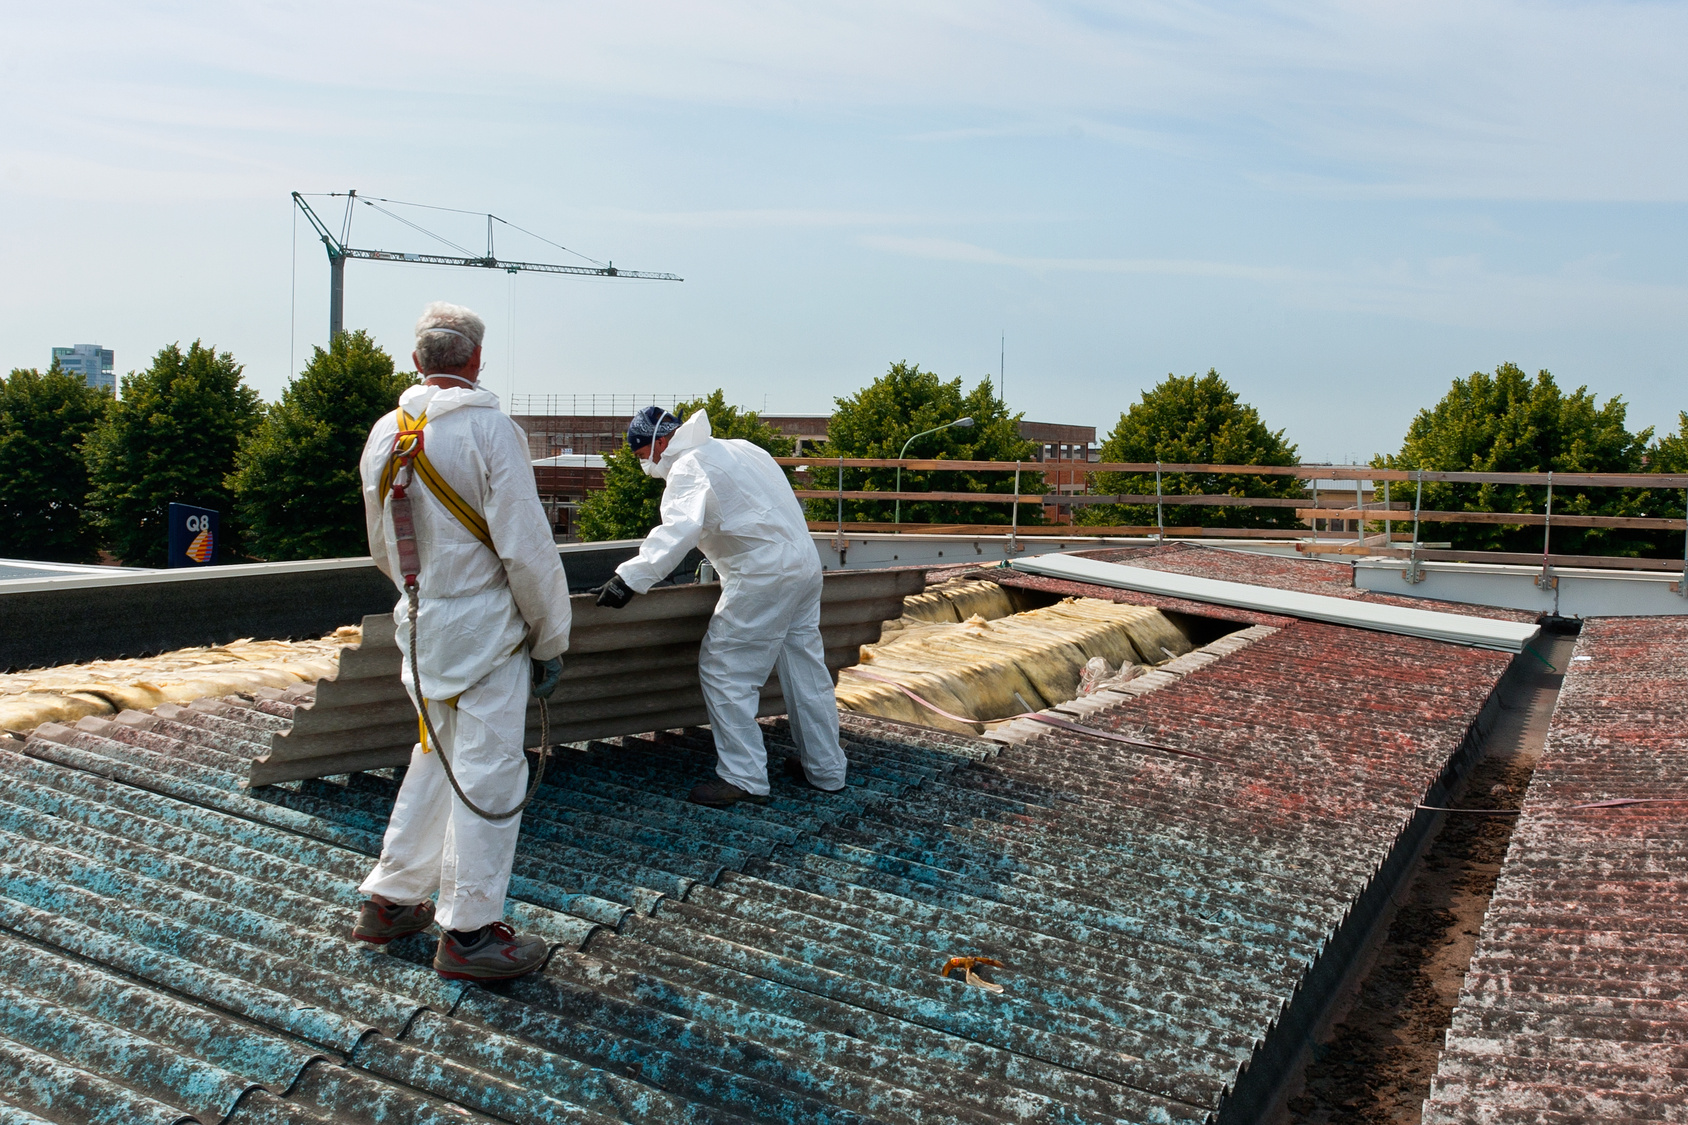 Residential Asbestos Removal Process